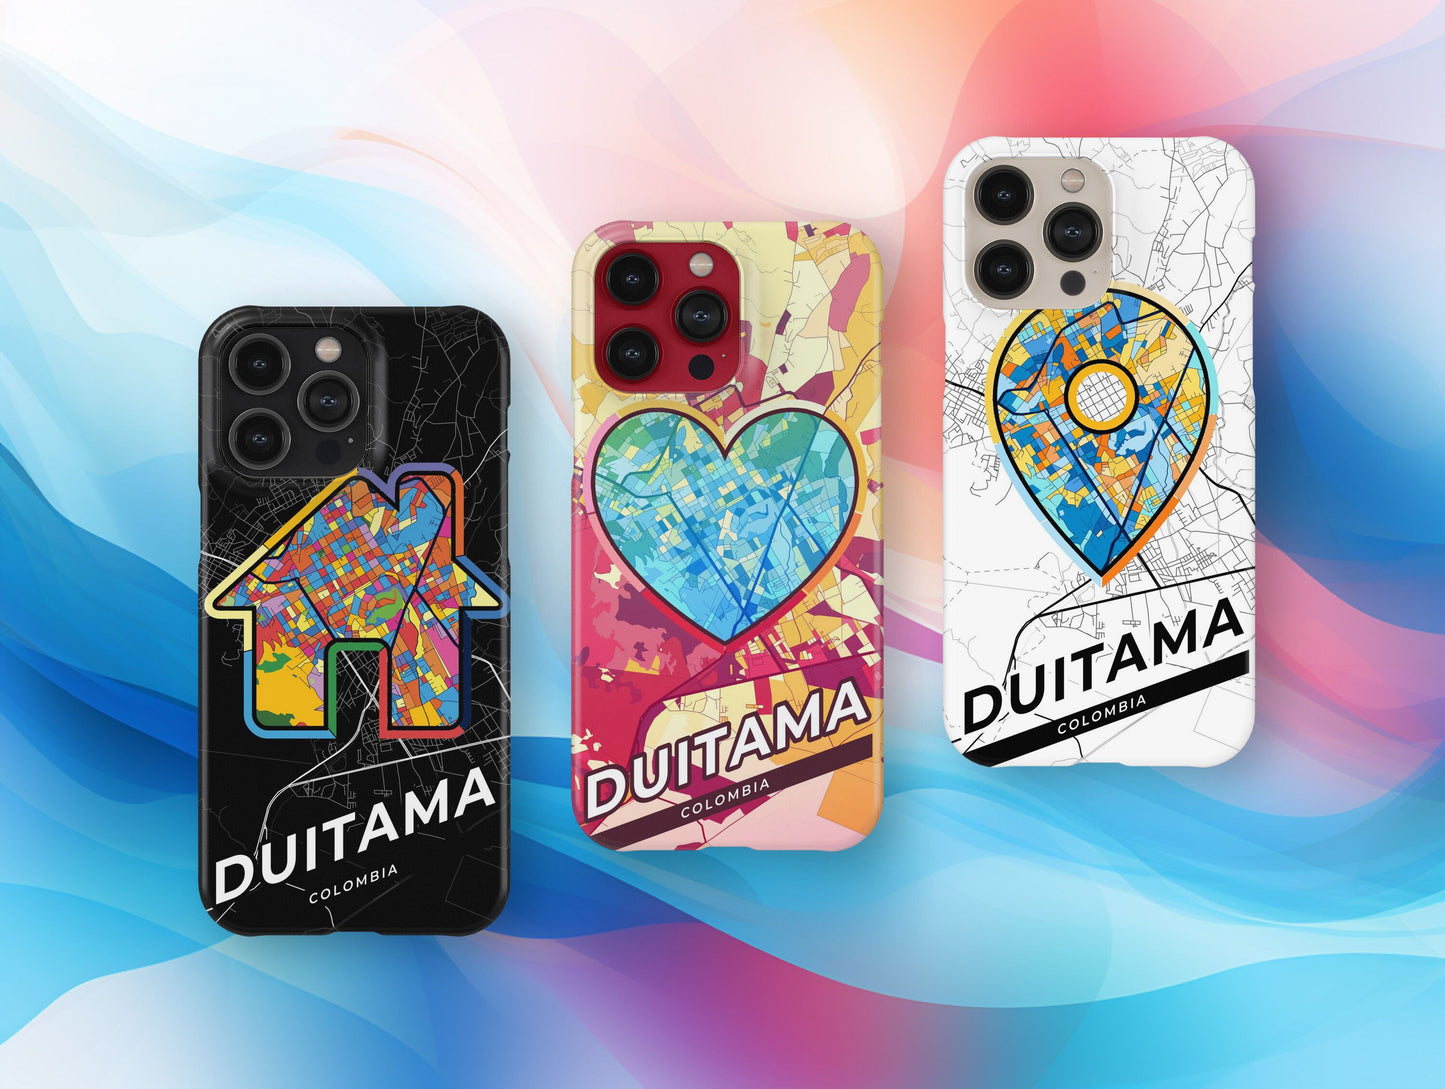 Duitama Colombia slim phone case with colorful icon. Birthday, wedding or housewarming gift. Couple match cases.